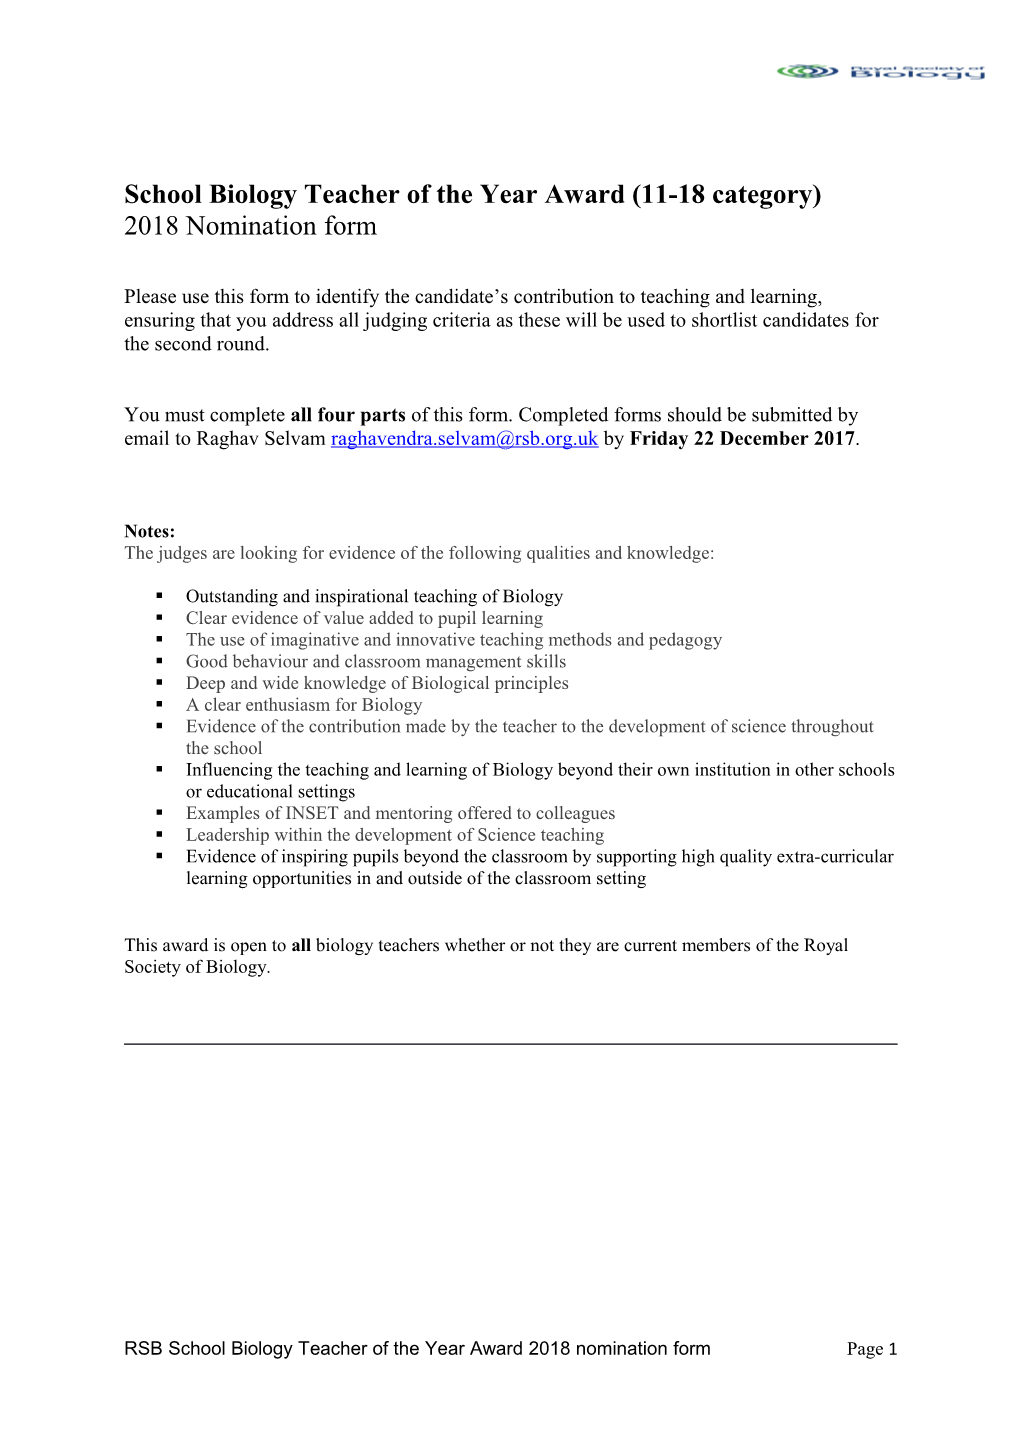 School Biology Teacher of the Year Award (11-18 Category) 2018Nomination Form